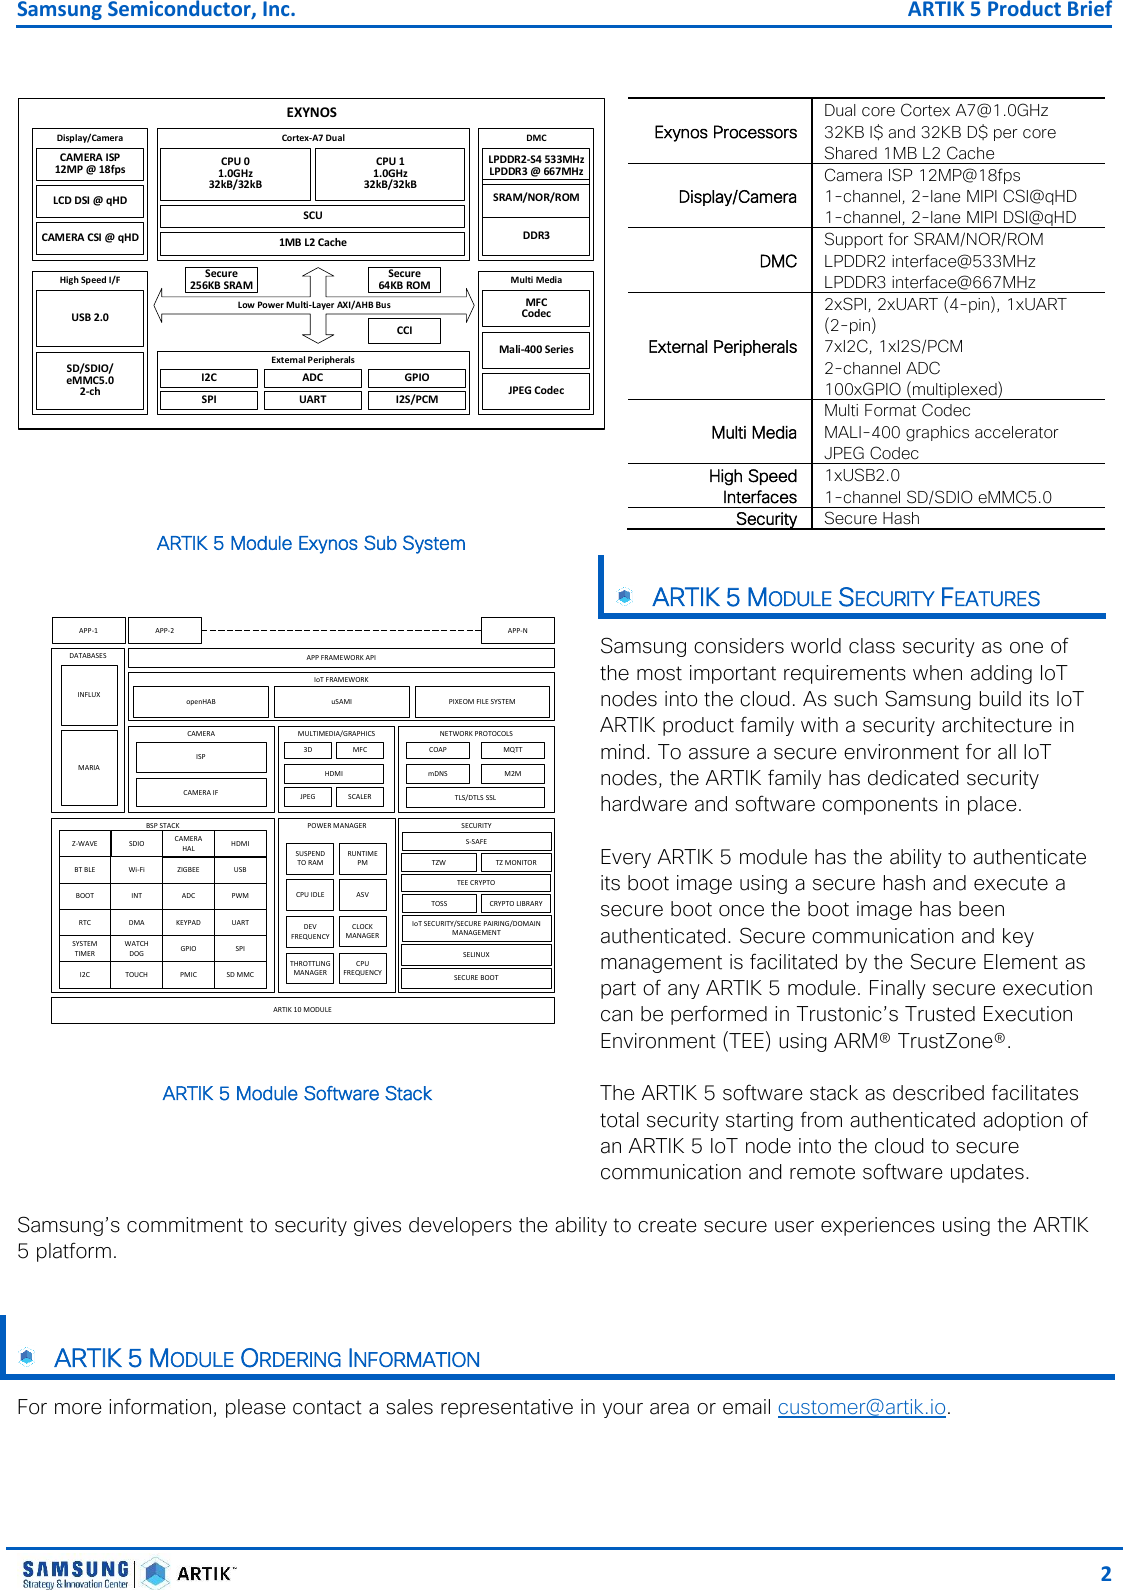 Samsung Semiconductor, Inc.  ARTIK 5 Product Brief   2    Exynos Processors Dual core Cortex A7@1.0GHz 32KB I$ and 32KB D$ per core Shared 1MB L2 Cache Display/Camera Camera ISP 12MP@18fps 1-channel, 2-lane MIPI CSI@qHD 1-channel, 2-lane MIPI DSI@qHD DMC Support for SRAM/NOR/ROM LPDDR2 interface@533MHz LPDDR3 interface@667MHz External Peripherals 2xSPI, 2xUART (4-pin), 1xUART (2-pin) 7xI2C, 1xI2S/PCM 2-channel ADC 100xGPIO (multiplexed) Multi Media Multi Format Codec MALI-400 graphics accelerator JPEG Codec High Speed Interfaces 1xUSB2.0 1-channel SD/SDIO eMMC5.0 Security Secure Hash  ARTIK 5 Module Exynos Sub System    ARTIK 5 MODULE SECURITY FEATURES Samsung considers world class security as one of the most important requirements when adding IoT nodes into the cloud. As such Samsung build its IoT ARTIK product family with a security architecture in mind. To assure a secure environment for all IoT nodes, the ARTIK family has dedicated security hardware and software components in place.   Every ARTIK 5 module has the ability to authenticate its boot image using a secure hash and execute a secure boot once the boot image has been authenticated. Secure communication and key management is facilitated by the Secure Element as part of any ARTIK 5 module. Finally secure execution can be performed in Trustonic’s Trusted Execution Environment (TEE) using ARM® TrustZone®.  The ARTIK 5 software stack as described facilitates total security starting from authenticated adoption of an ARTIK 5 IoT node into the cloud to secure communication and remote software updates. ARTIK 5 Module Software Stack  Samsung’s commitment to security gives developers the ability to create secure user experiences using the ARTIK 5 platform.     ARTIK 5 MODULE ORDERING INFORMATION For more information, please contact a sales representative in your area or email customer@artik.io.    EXYNOSDisplay/CameraCAMERA ISP12MP @ 18fpsLCD DSI @ qHDCAMERA CSI @ qHDHigh Speed I/FUSB 2.0SD/SDIO/eMMC5.02-chDMCSRAM/NOR/ROMMulti MediaCortex-A7 DualExternal PeripheralsCPU 01.0GHz32kB/32kBCPU 11.0GHz32kB/32kBSCU1MB L2 CacheMFCCodecMali-400 SeriesJPEG CodecLPDDR2-S4 533MHzLPDDR3 @ 667MHzDDR3I2CSPIADCUARTGPIOI2S/PCMSecure256KB SRAMSecure64KB ROMCCILow Power Multi-Layer AXI/AHB BusIoT FRAMEWORKNETWORK PROTOCOLSCOAP MQTTmDNS M2MTLS/DTLS SSLDATABASESMARIAINFLUXSECURITYSECURE BOOTSELINUXTZ MONITORTEE CRYPTOTZWCRYPTO LIBRARYS-SAFETOSSIoT SECURITY/SECURE PAIRING/DOMAIN MANAGEMENTPOWER MANAGERSUSPEND TO RAMRUNTIME PMCPU IDLE ASVCPU FREQUENCYTHROTTLING MANAGERDEV FREQUENCYCLOCK MANAGERARTIK 10 MODULEAPP FRAMEWORK APIAPP-1 APP-2 APP-NCAMERACAMERA IFISPMULTIMEDIA/GRAPHICS3D MFCJPEG SCALERHDMIBSP STACKBOOT INTRTC DMASYSTEM TIMERWATCH DOGADCKEYPADGPIOPWMUARTSPII2C TOUCH PMIC SD MMCSDIOWi-FiBT BLEZ-WAVEUSBZIGBEECAMERA HAL HDMIopenHAB uSAMI PIXEOM FILE SYSTEM